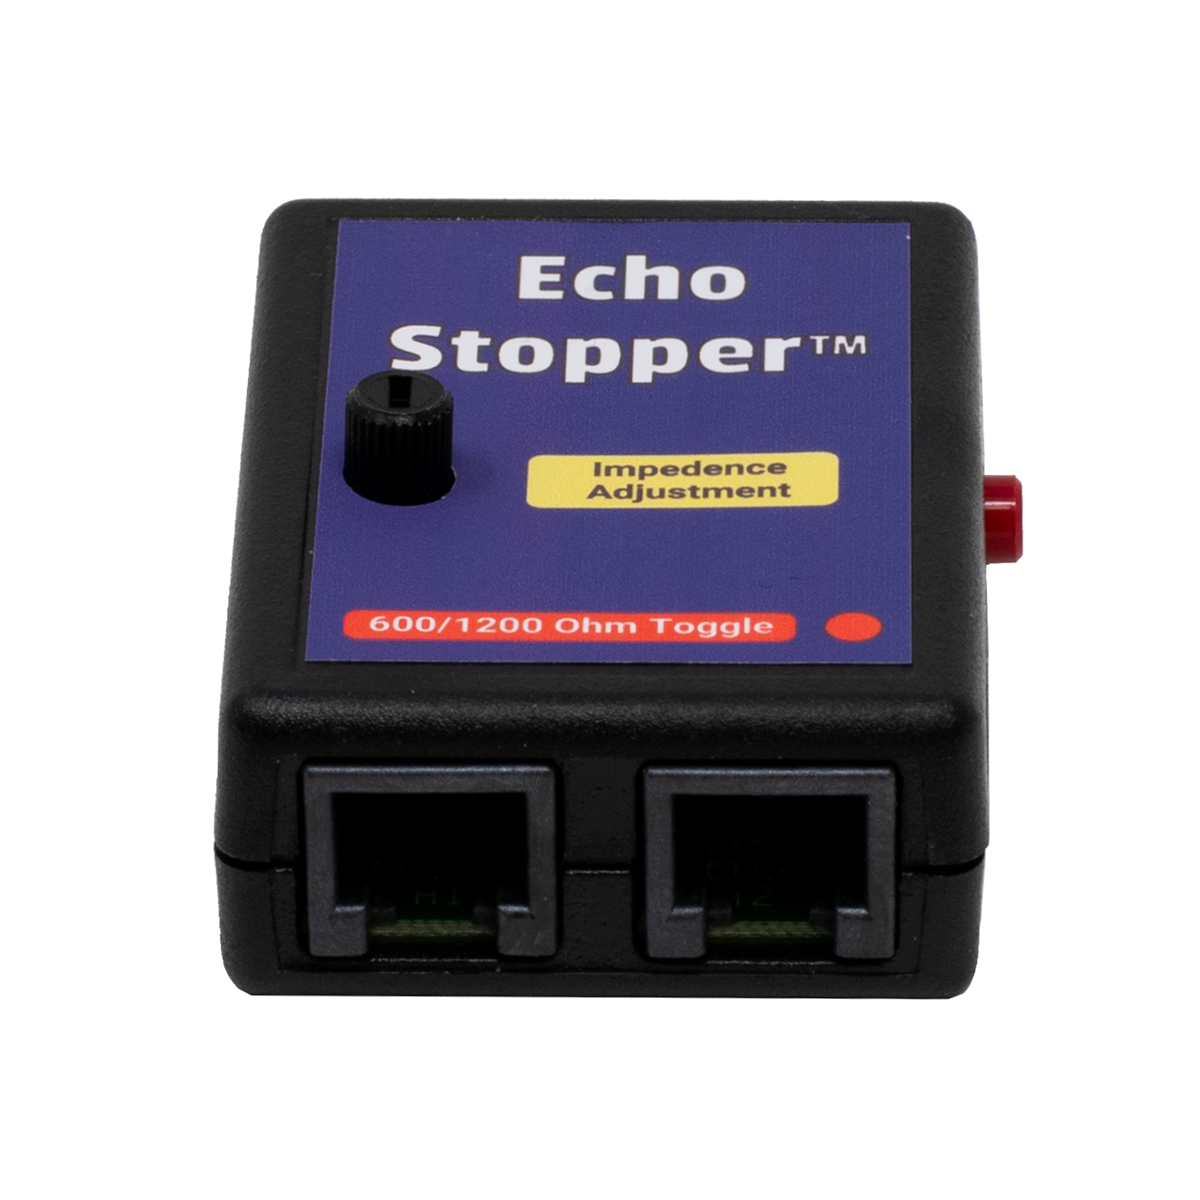 Echo Stopper (Front View)